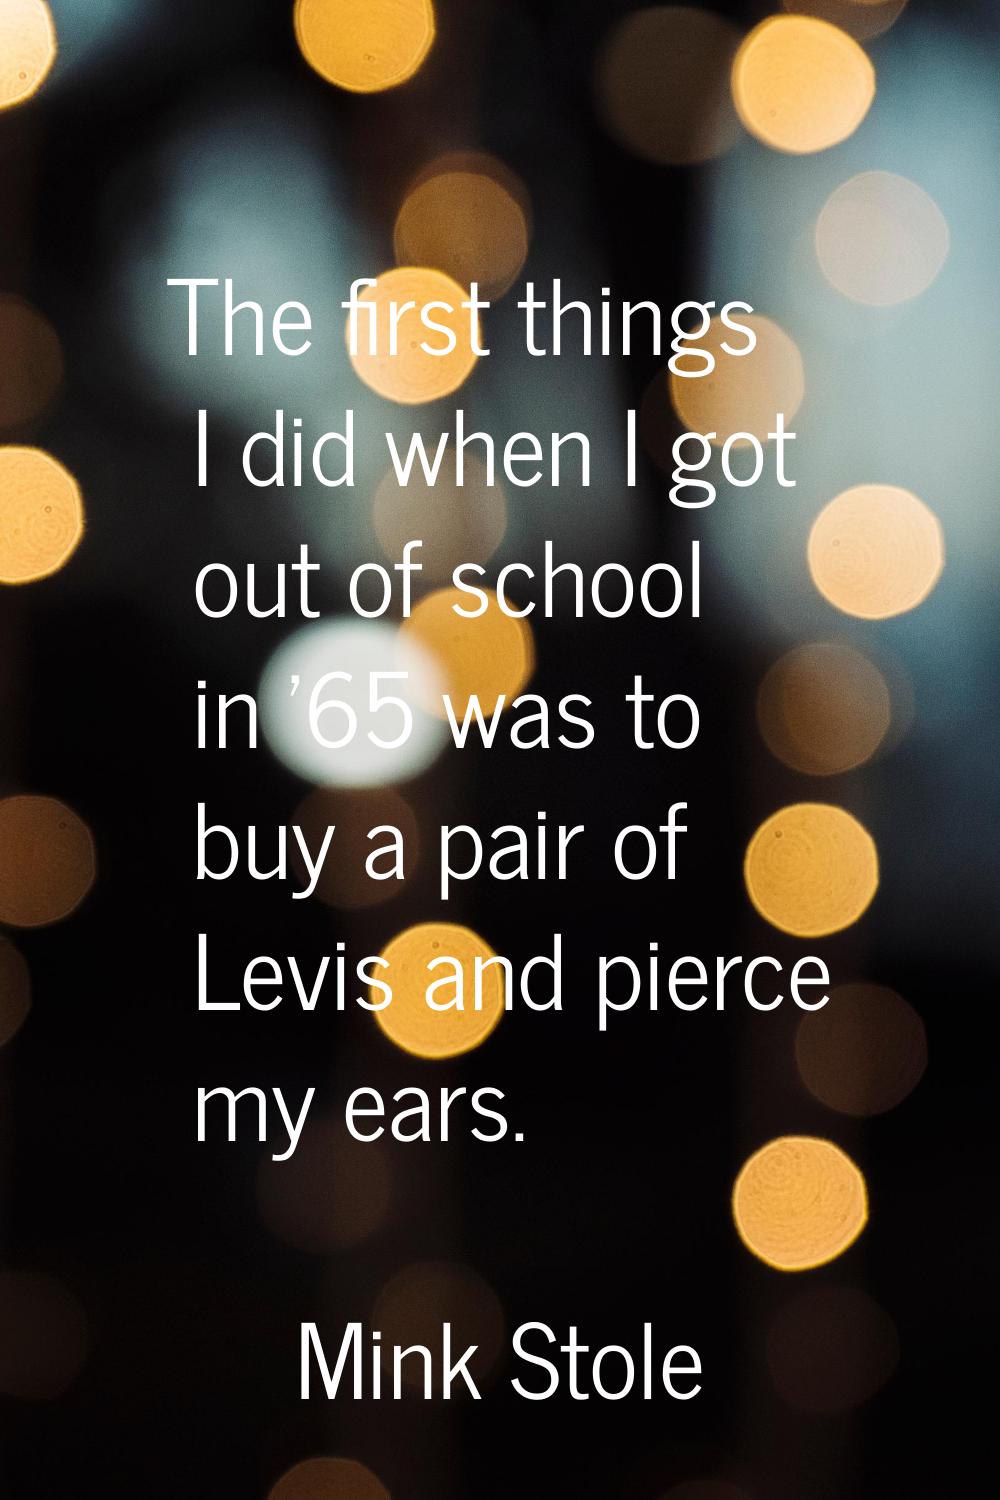 The first things I did when I got out of school in '65 was to buy a pair of Levis and pierce my ear